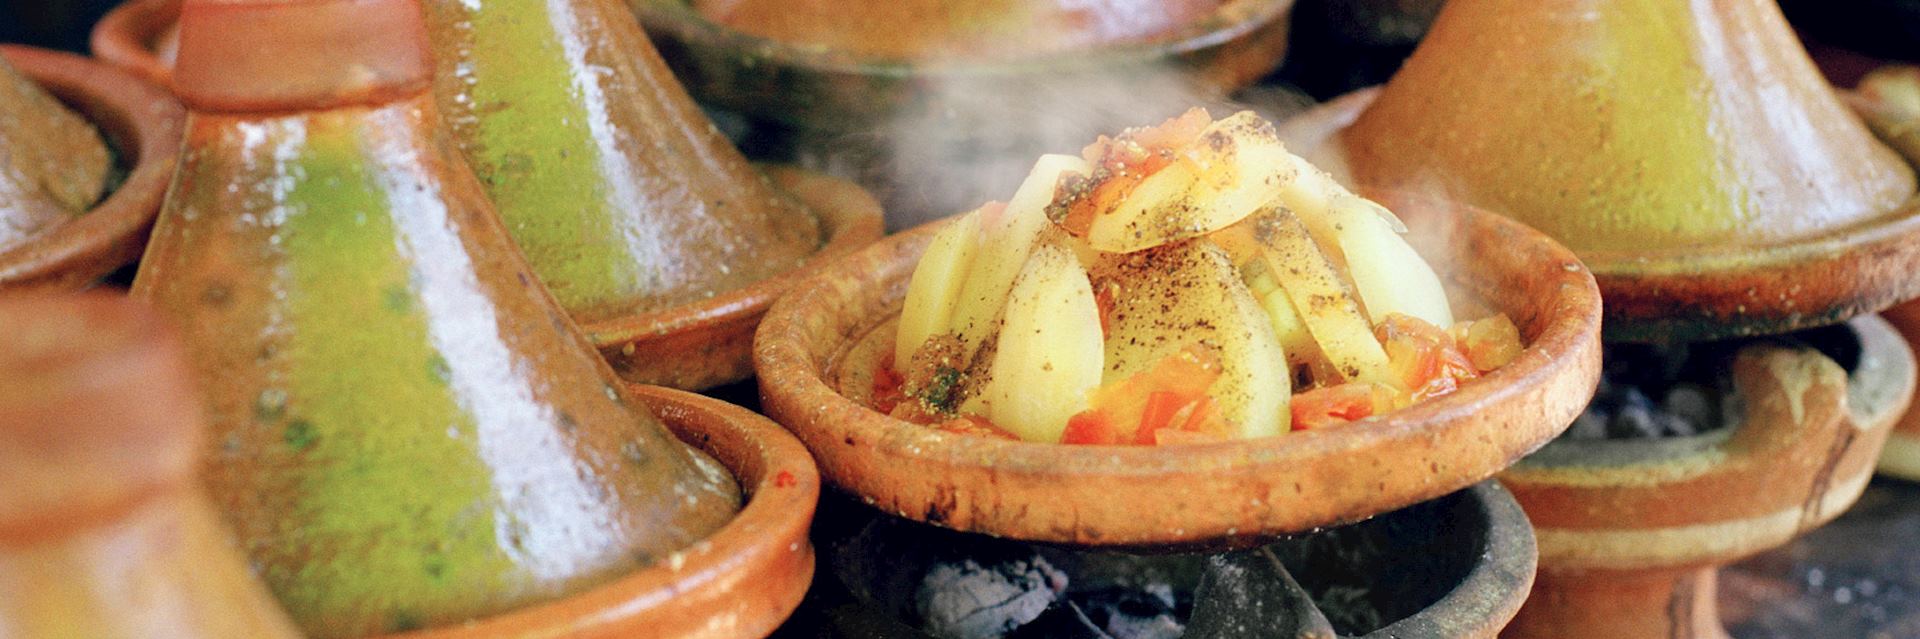 Cooking with tagines in Morocco